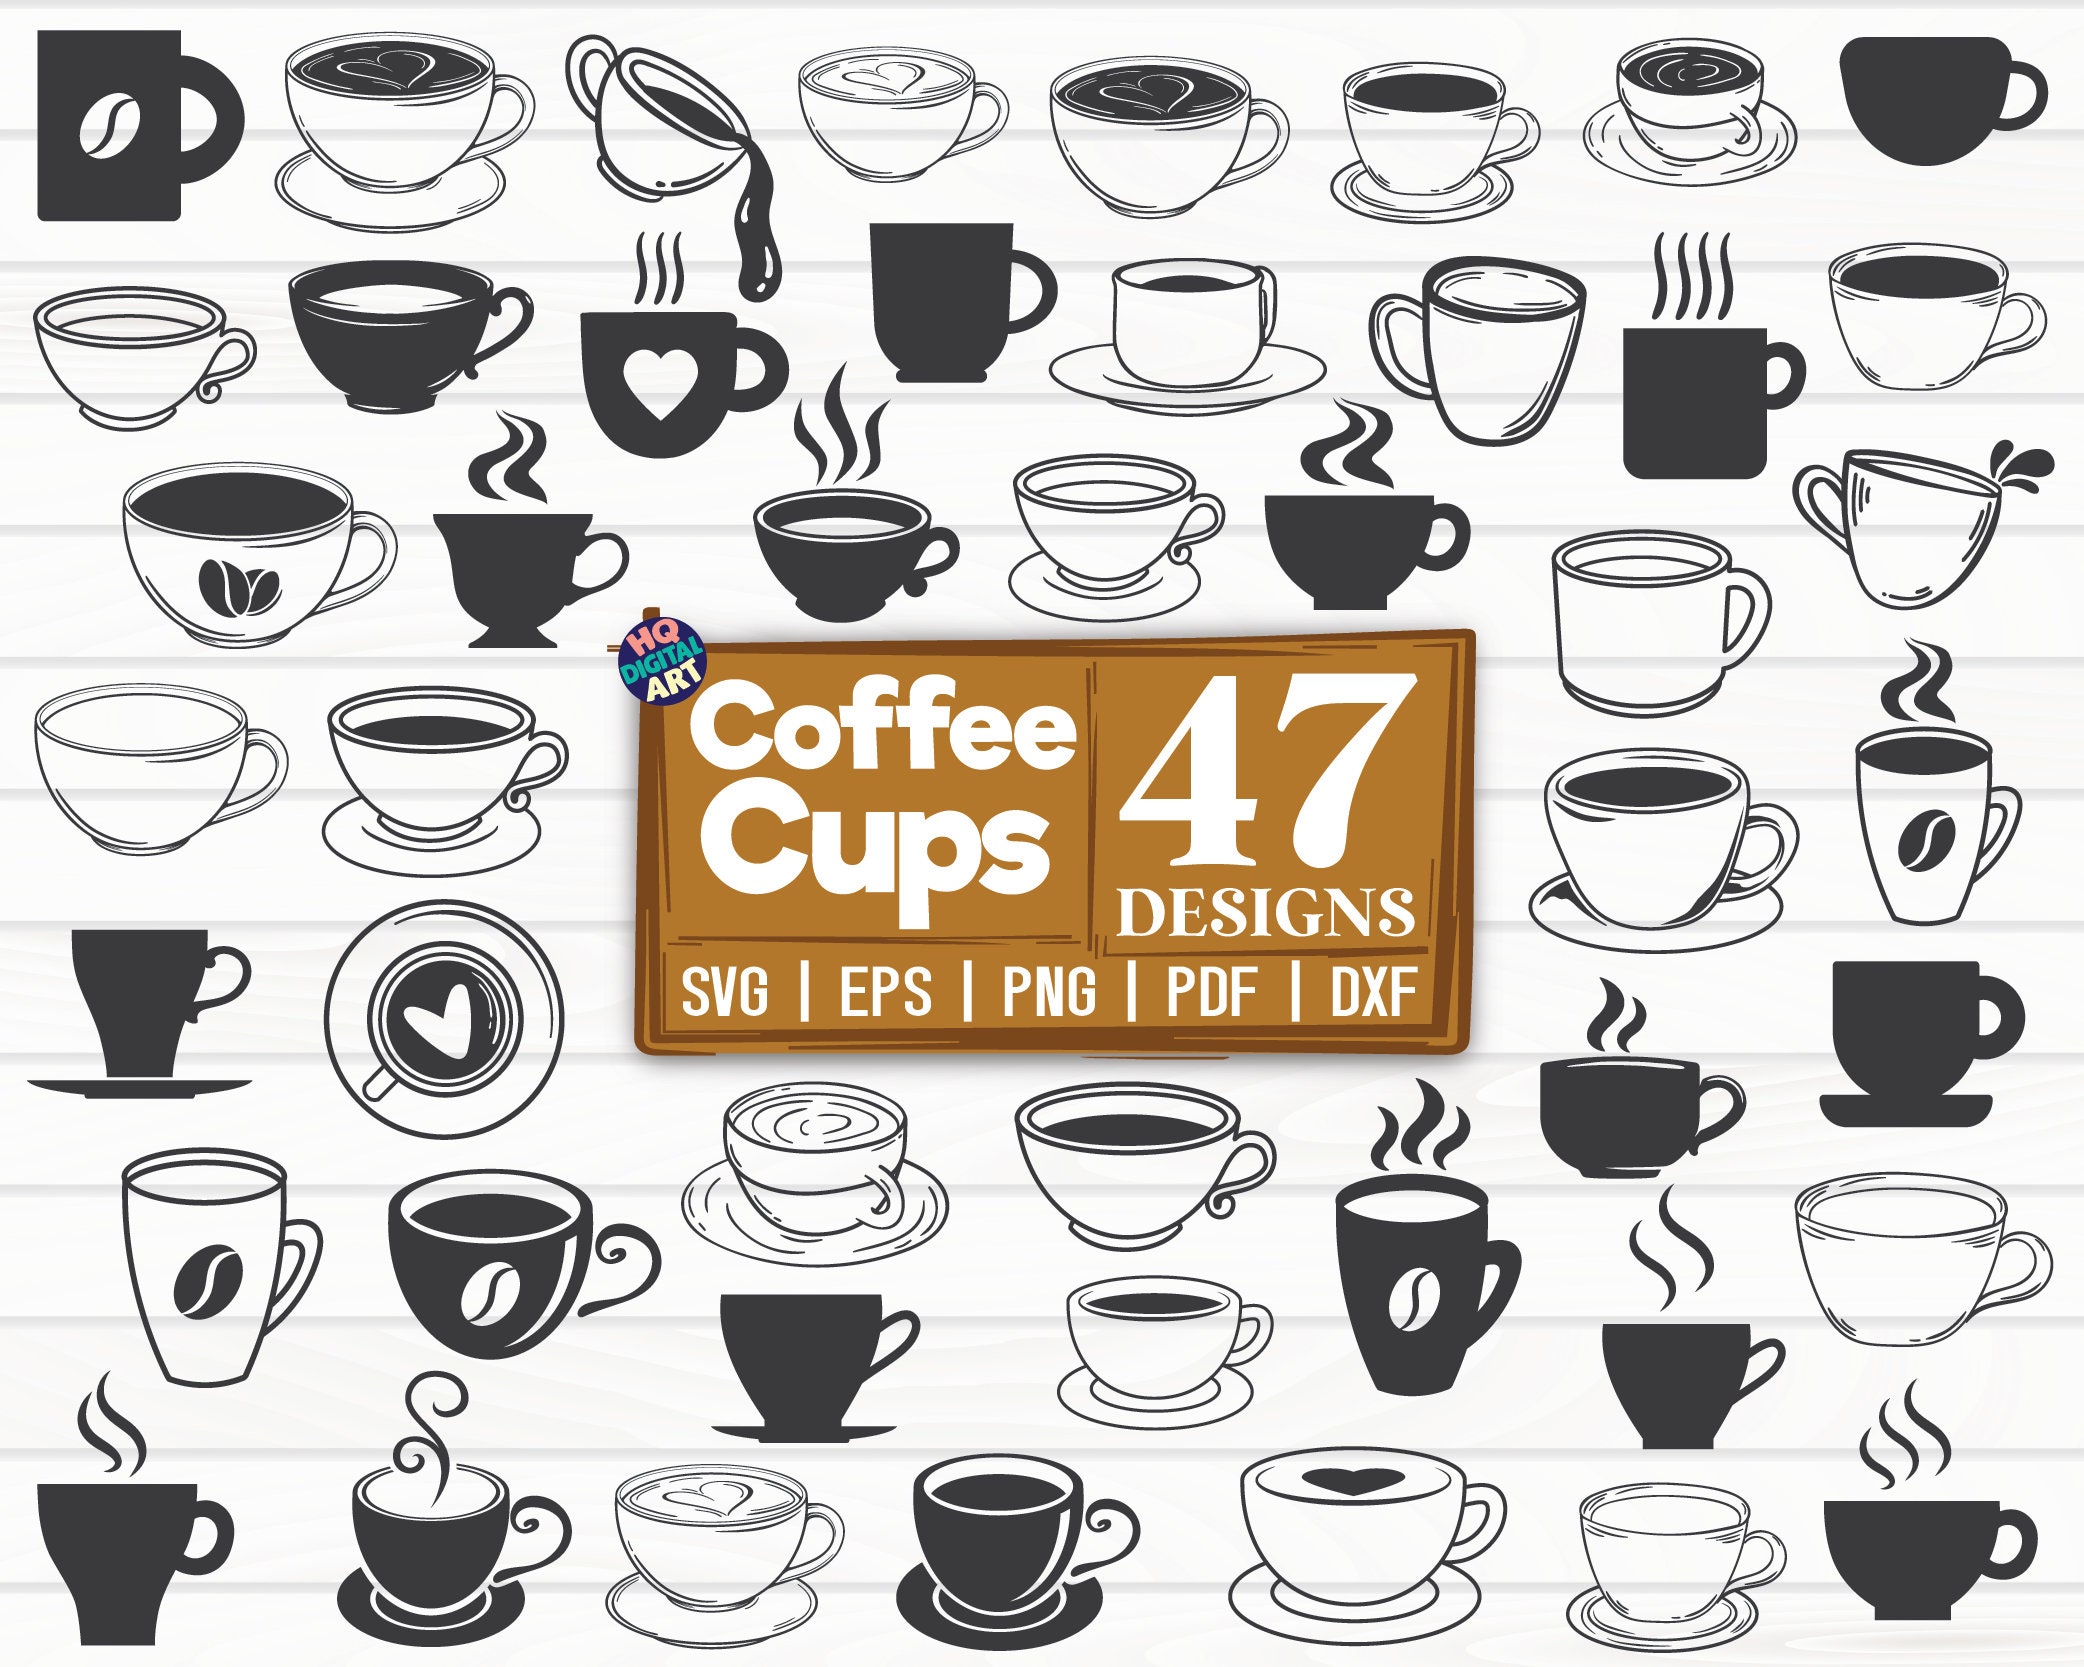 Coffee Mugs Clipart, Coffees Clip Art, Rainbow Morning Hot Tea Cup Mug  Breakfast Beverage Drink Cute, PNG Graphic Download, Commercial Use -   Sweden